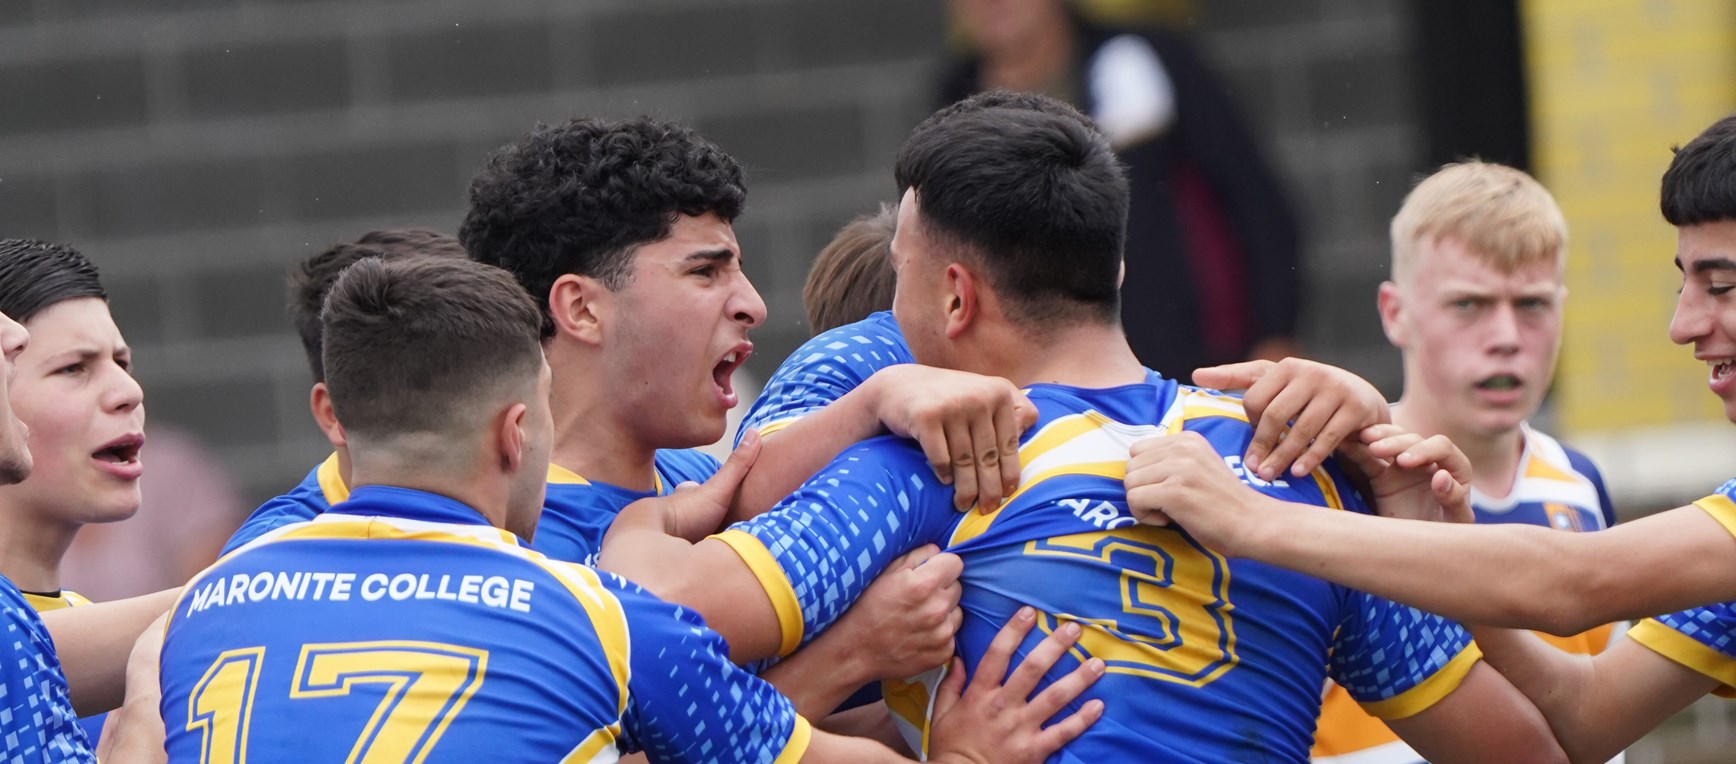 Parramatta Eels Cup 16s Grand Final - Gilroy College V Maronite Gallery